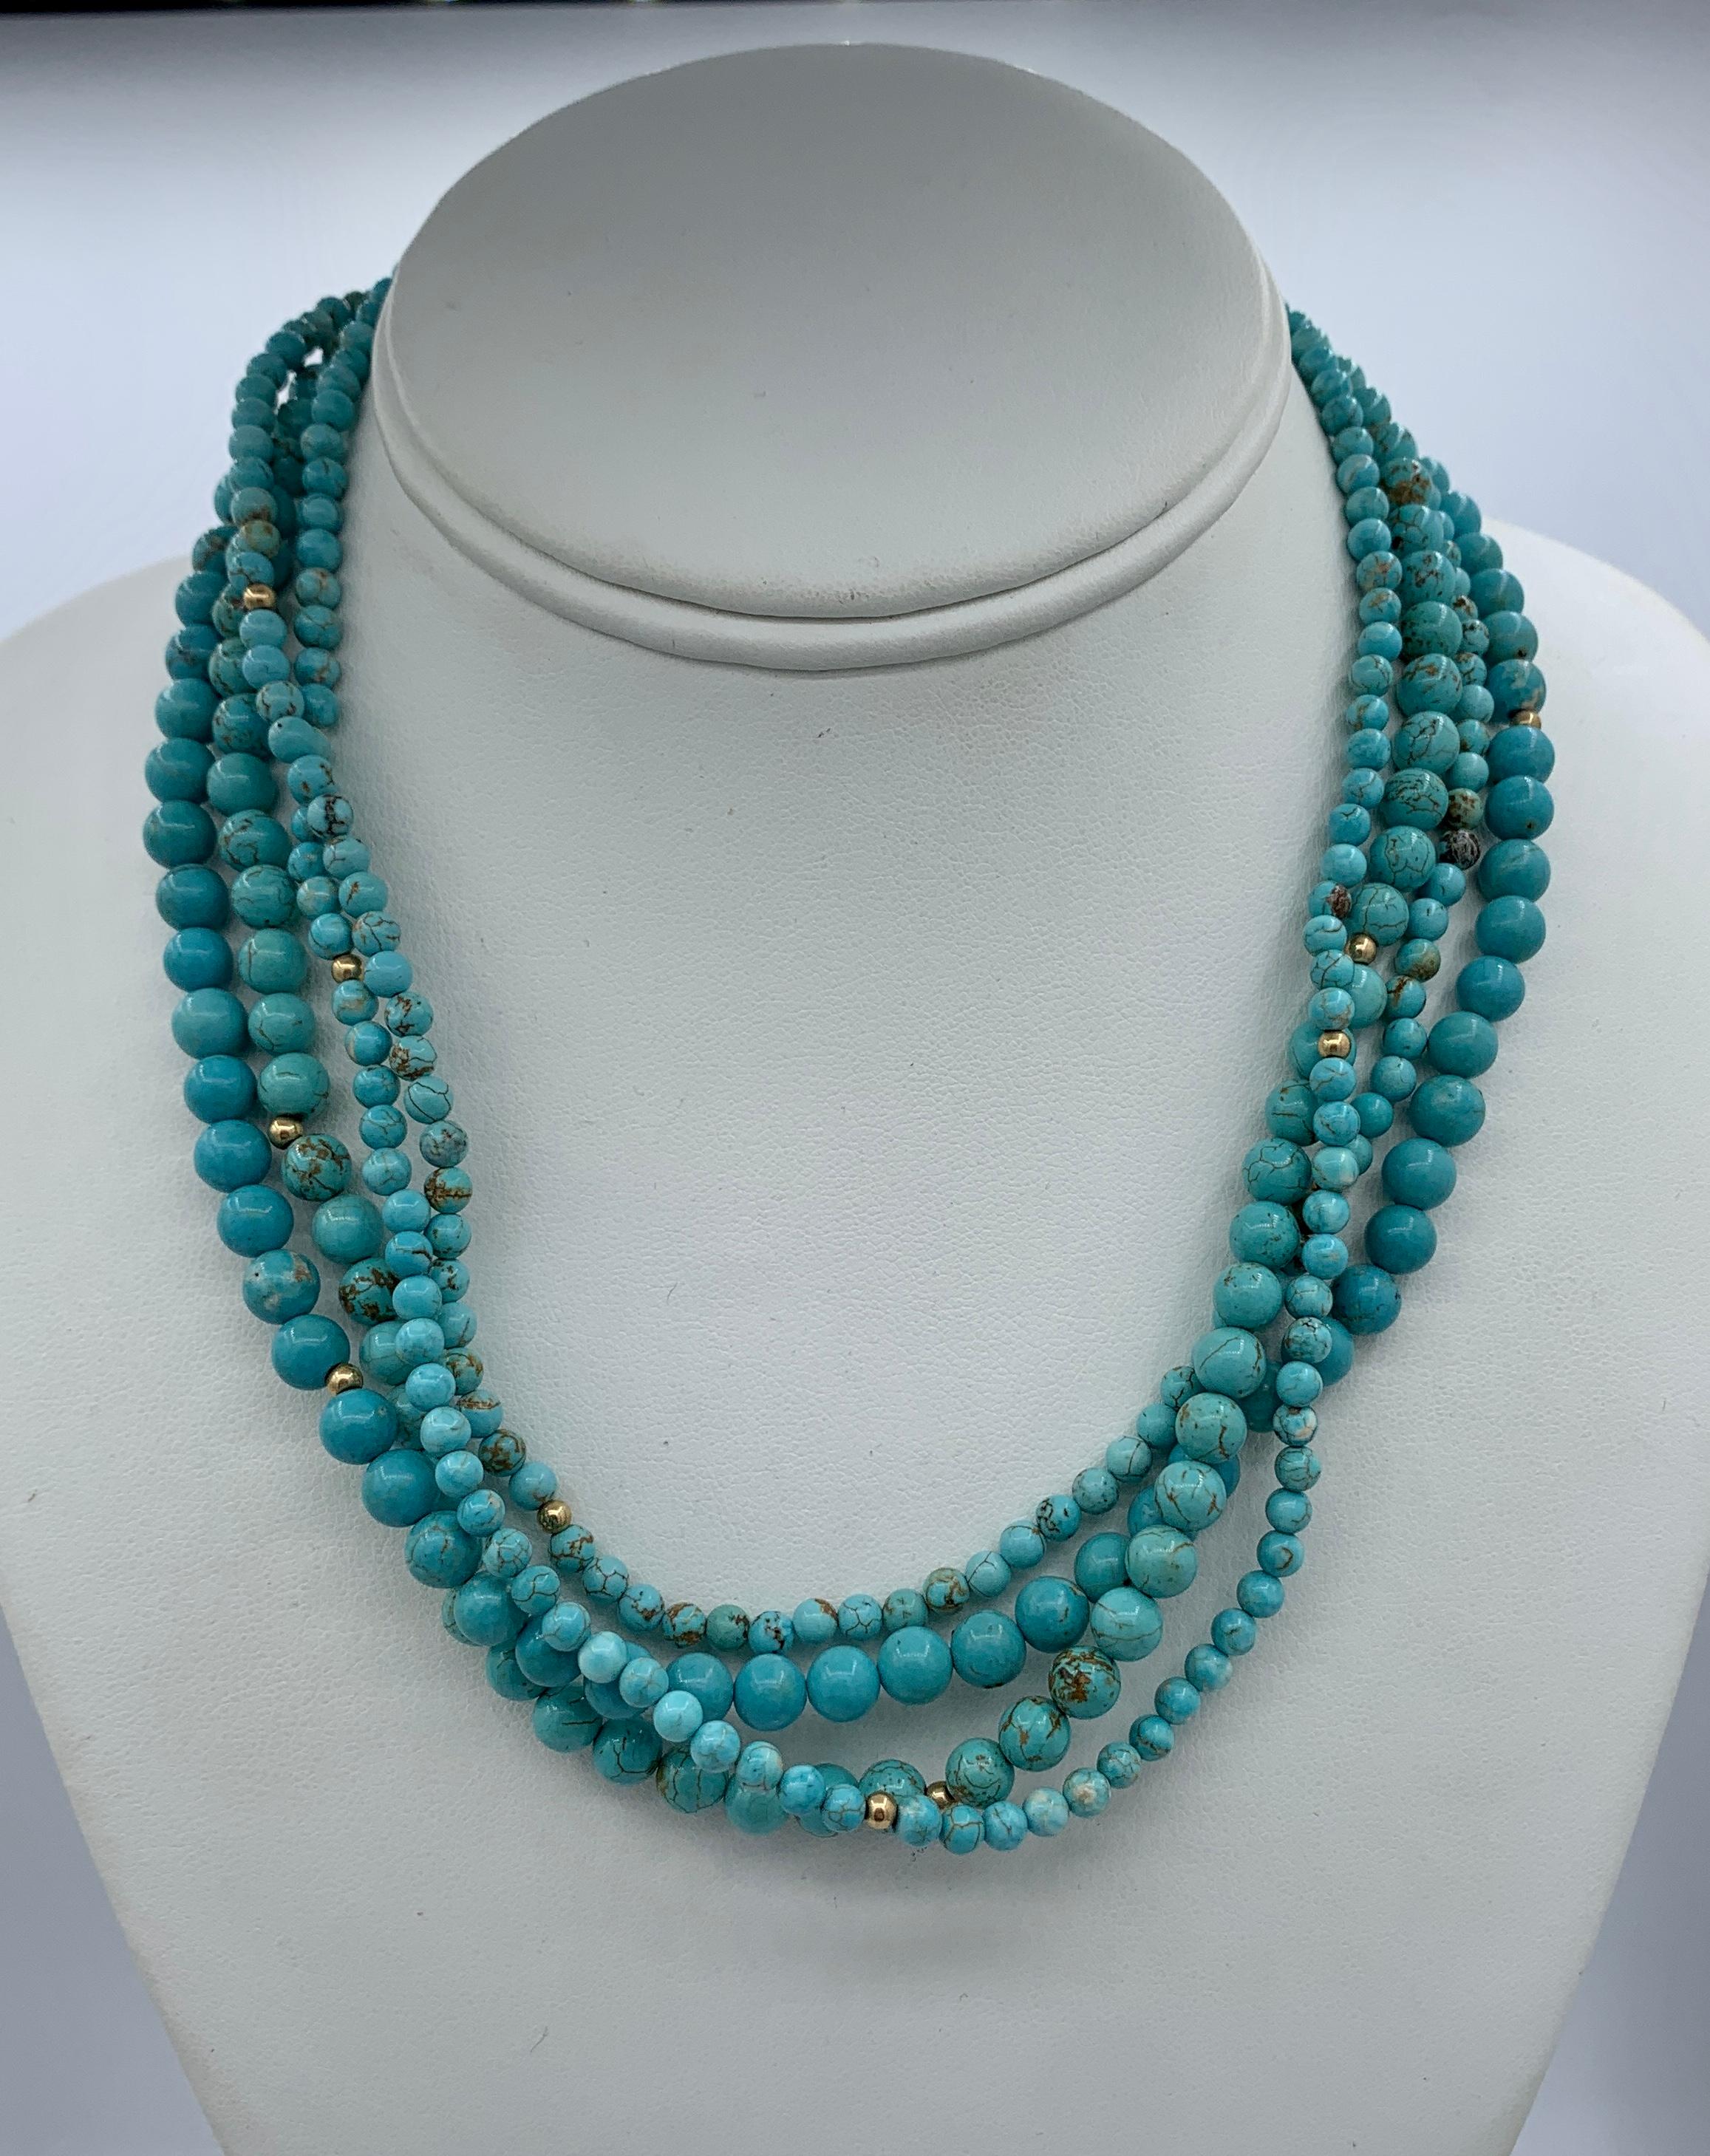 This is a beautiful Persian Turquoise 14 Karat Yellow Gold four strand Torsade Necklace.  The lovely necklace has four strands of natural Persian Turquoise beads interspaced with 14 Karat Yellow Gold beads with 14 Karat Gold clasp.  The elegant